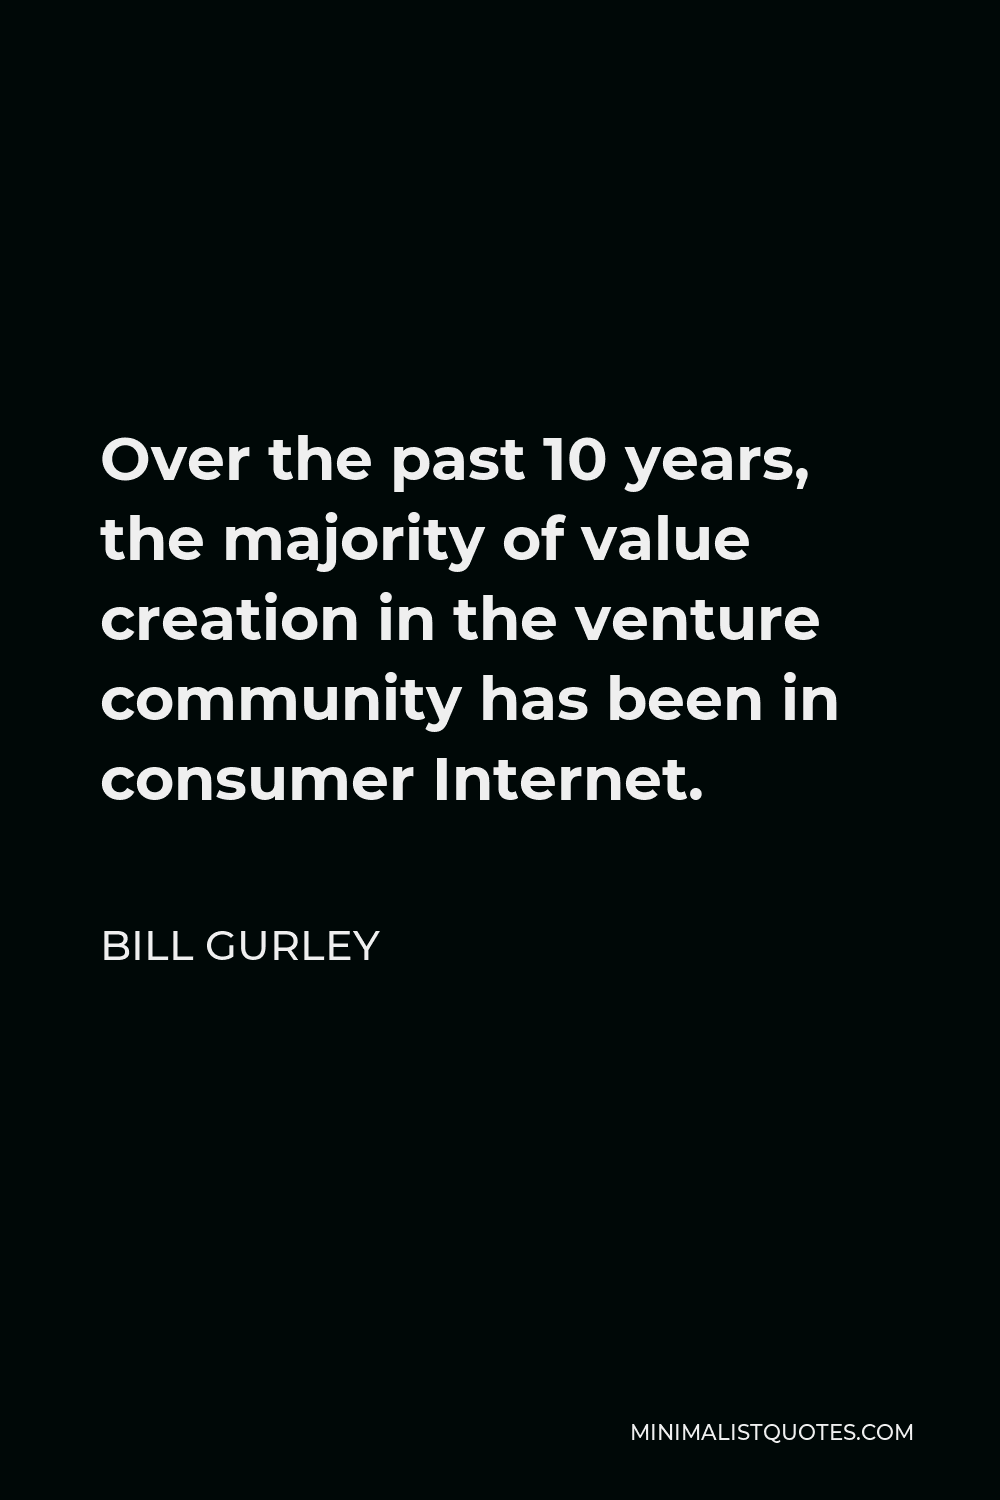 Bill Gurley Quote - Over the past 10 years, the majority of value creation in the venture community has been in consumer Internet.